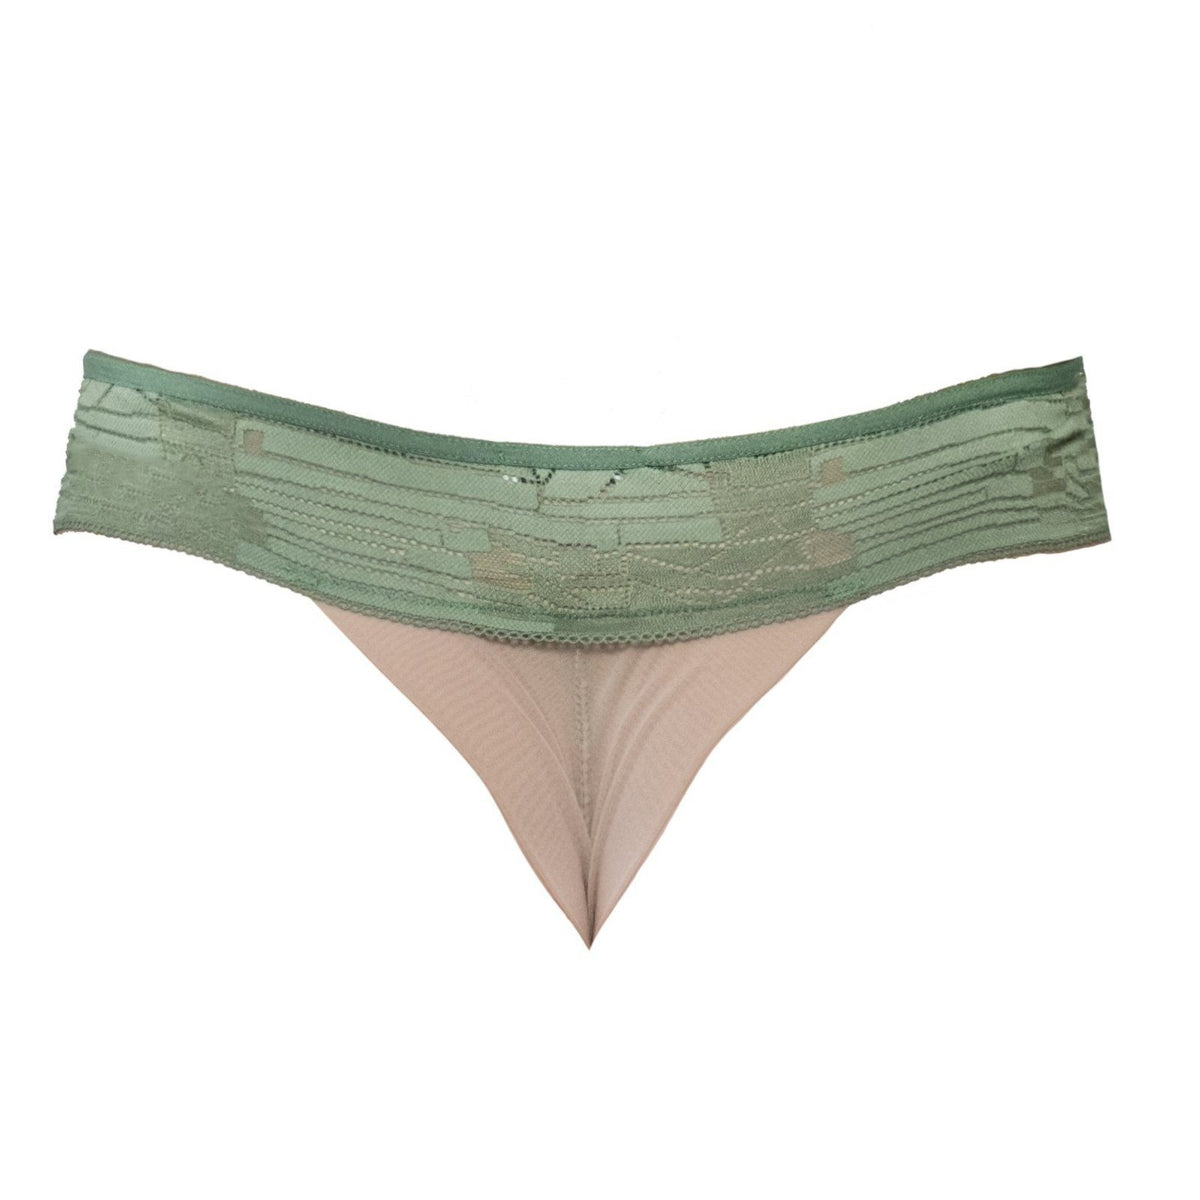 Delicate sexy thong | green and nude - Carol Coelho Cleopatra